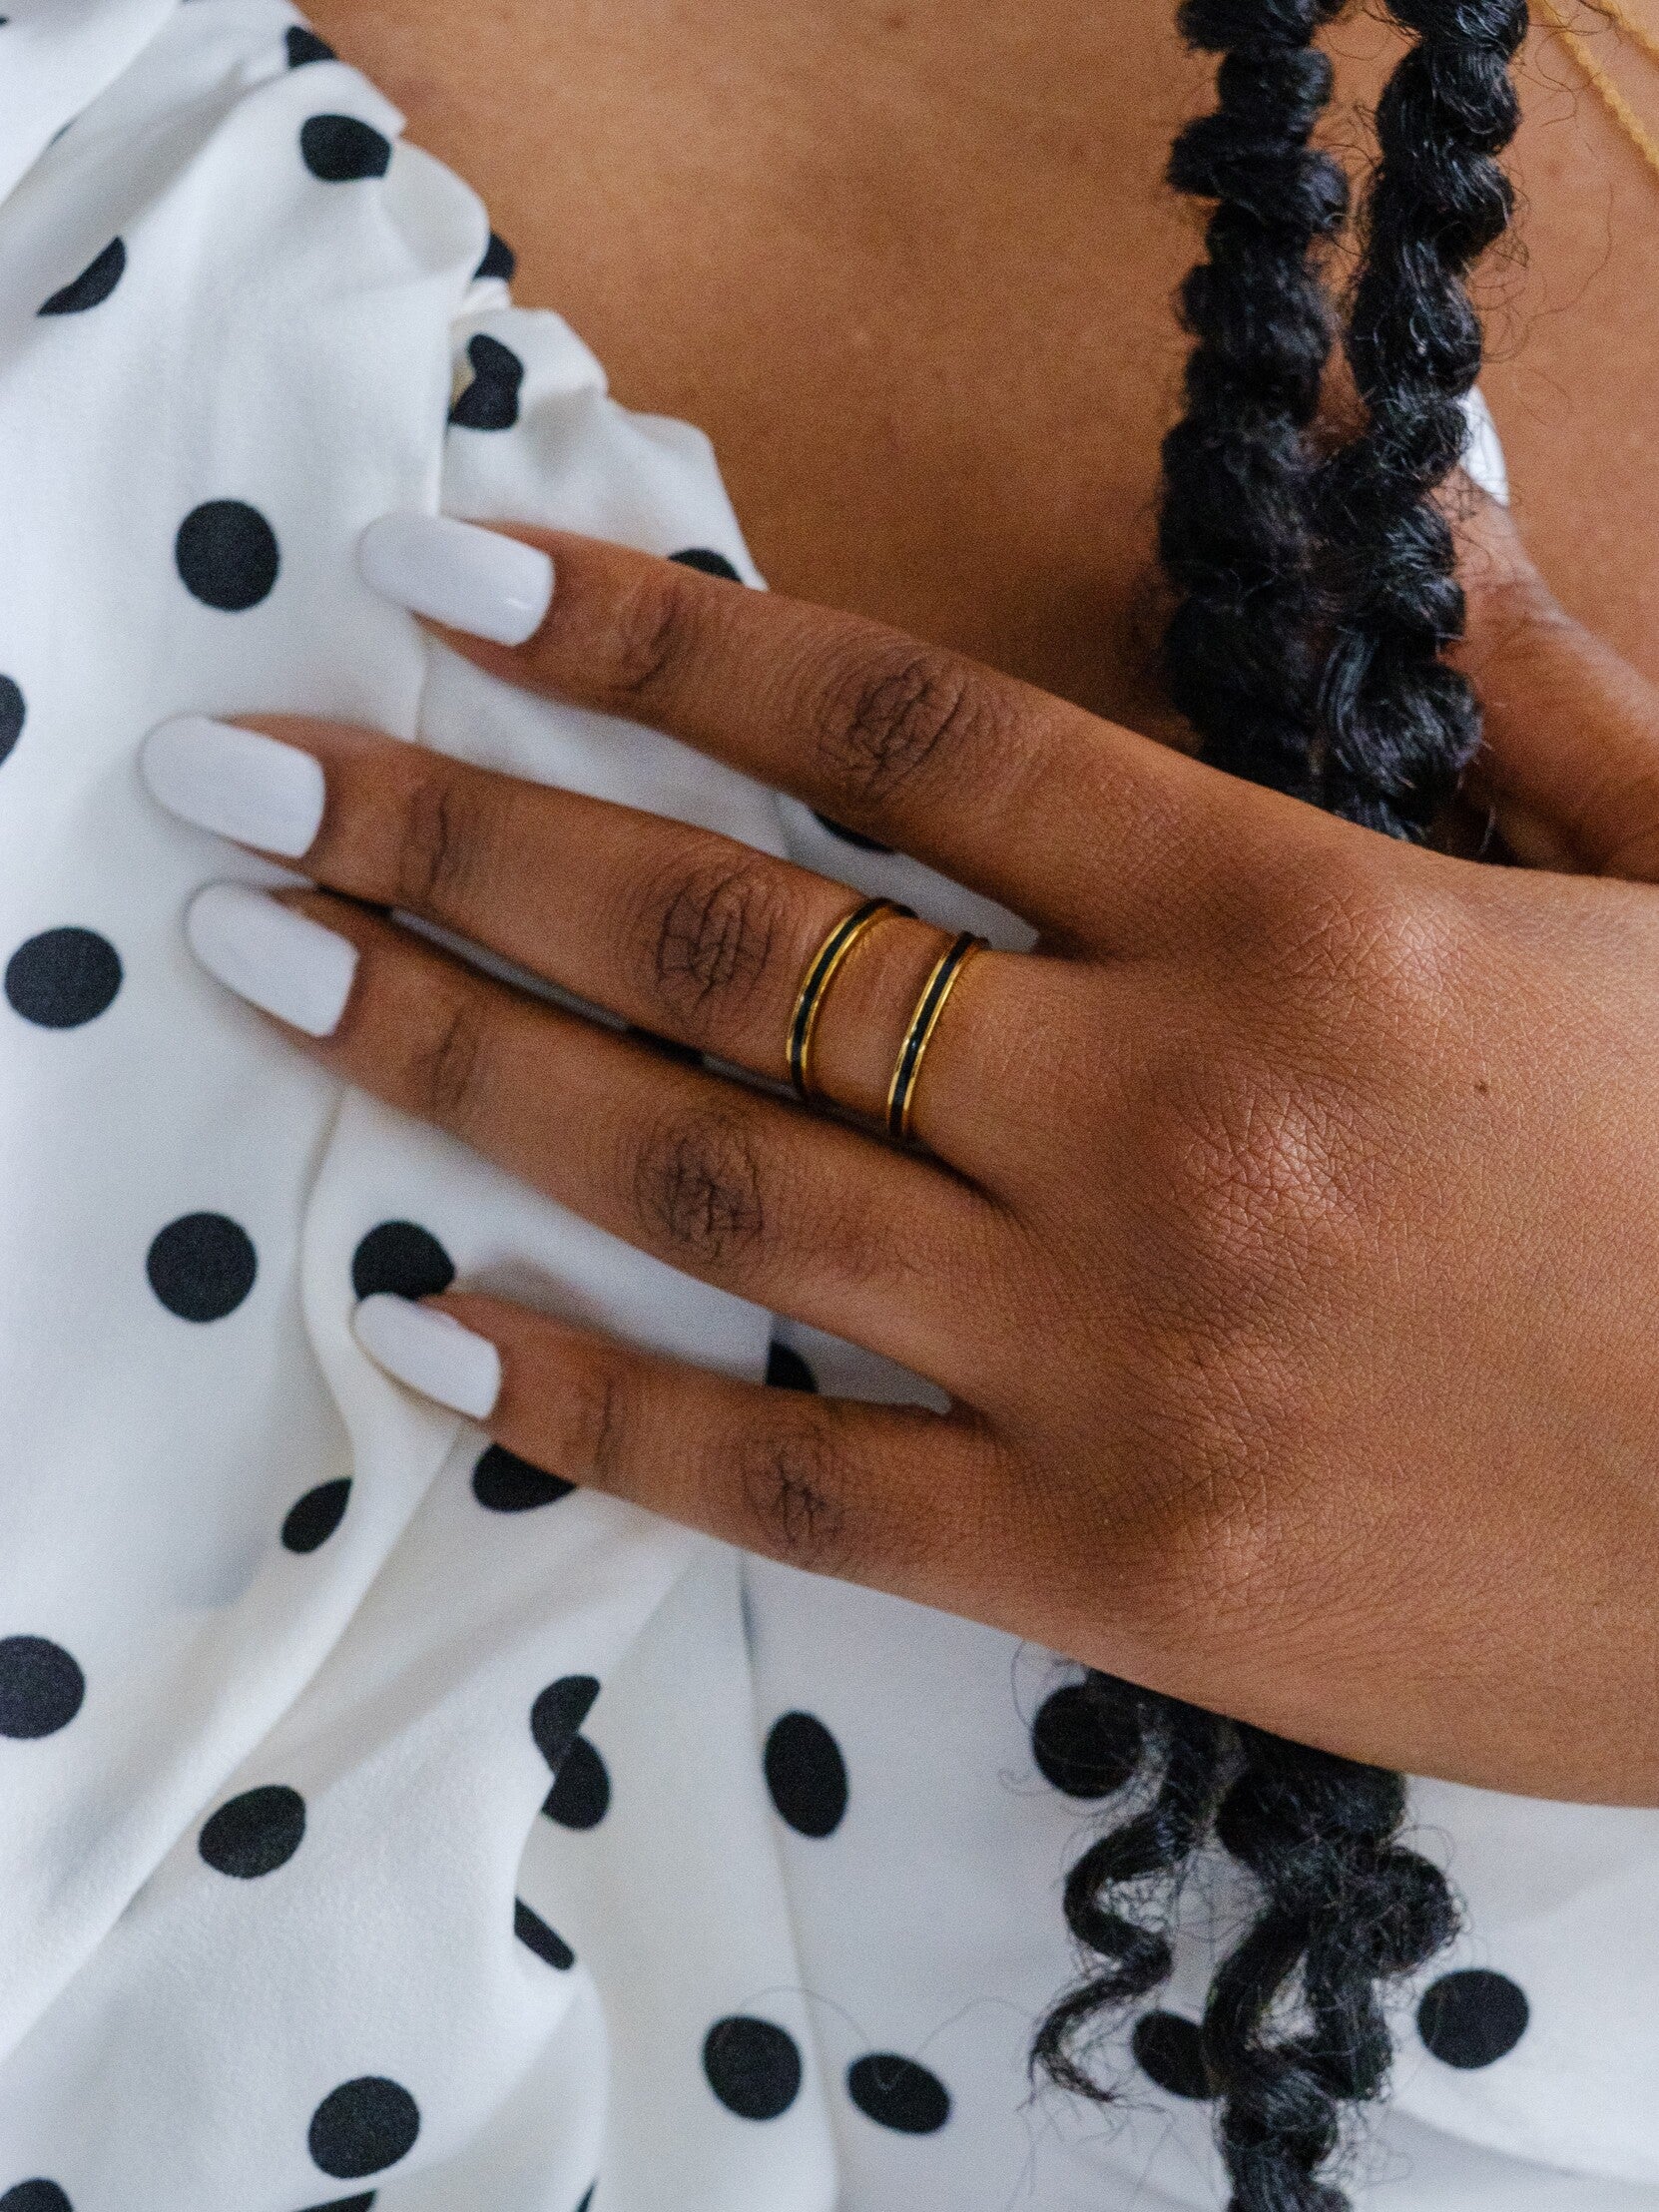 A woman wears two gold band rings with black enamel banding around the middle